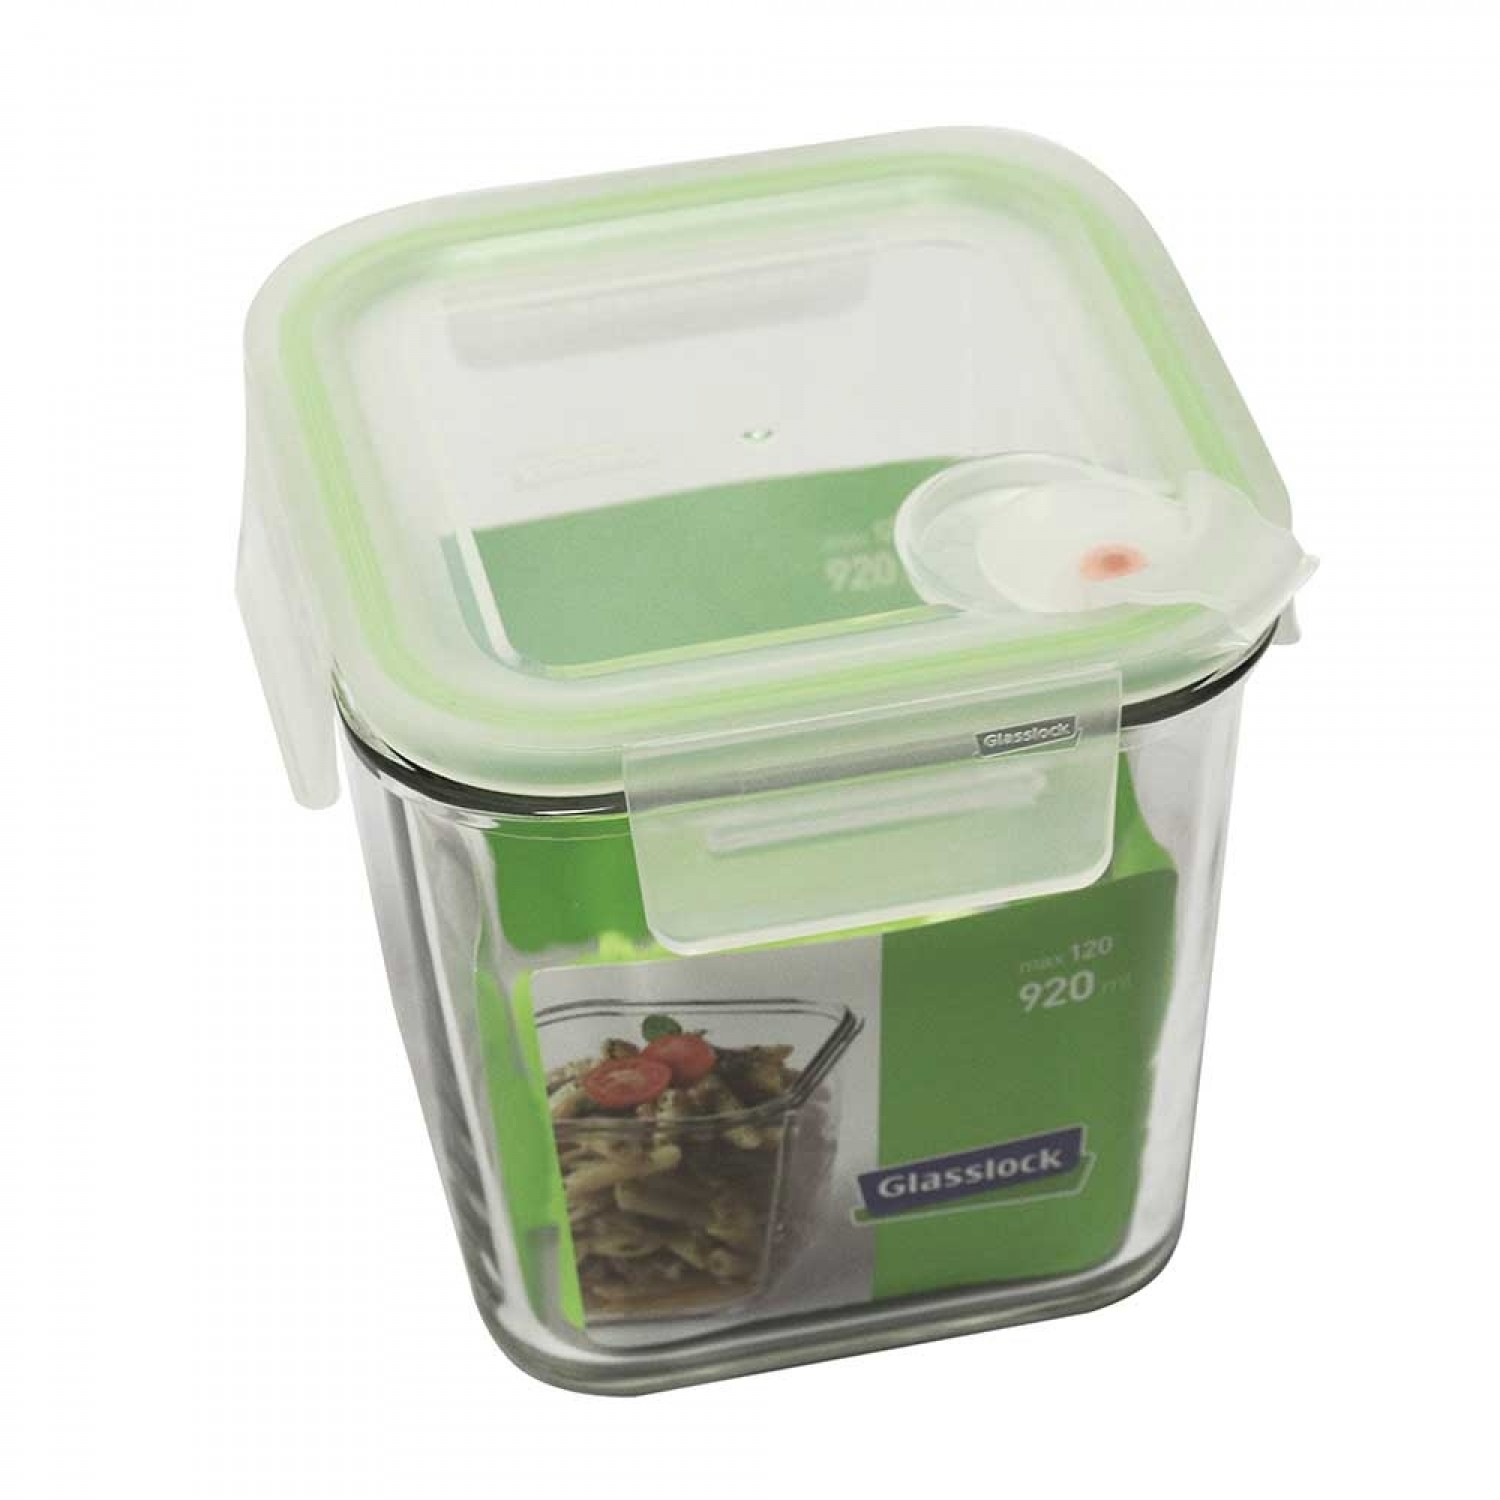 Square Glasslock Food Container Air Type with lid, 920 ml